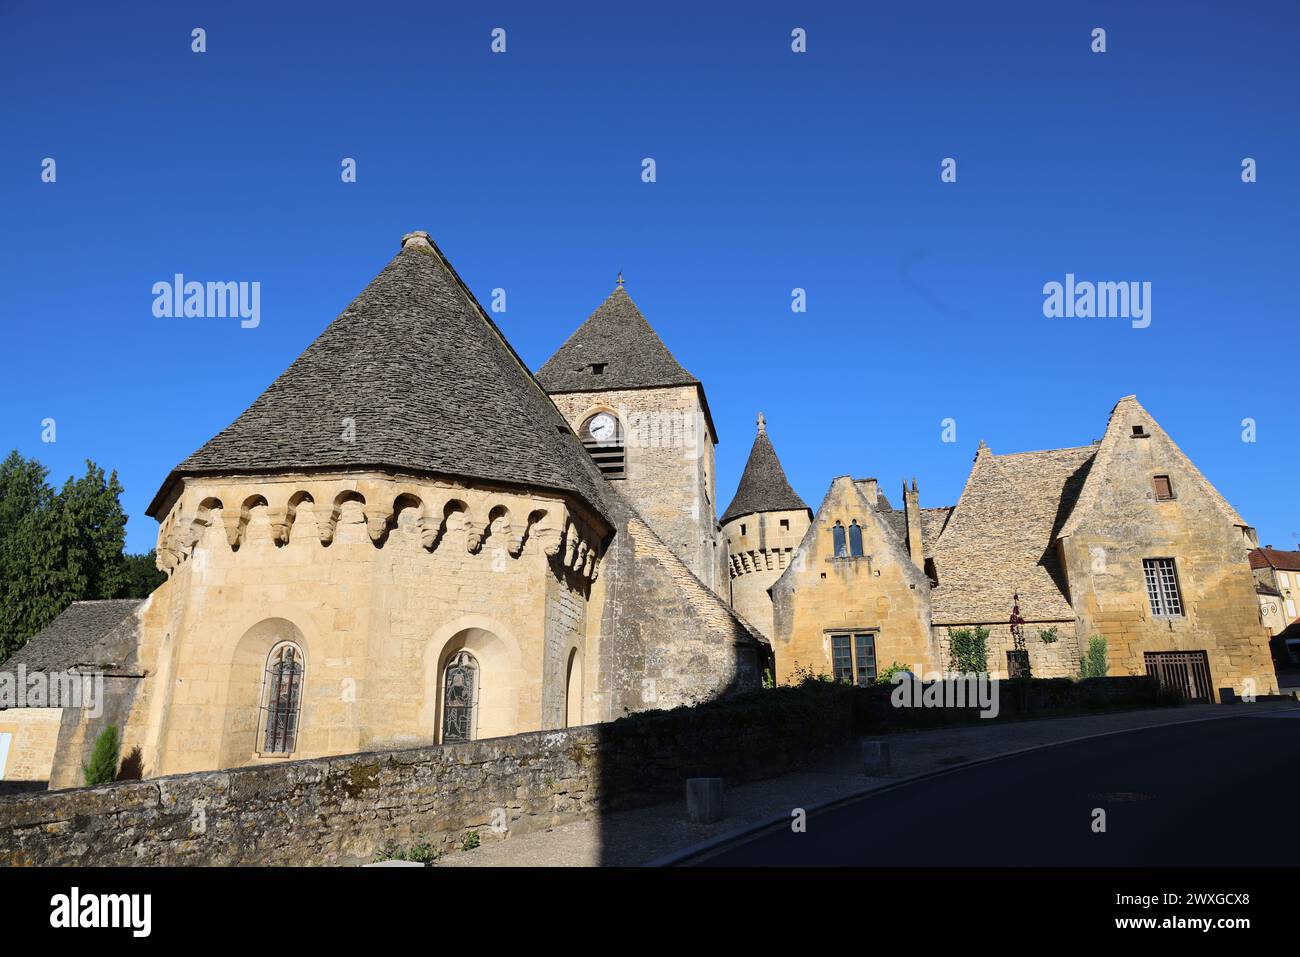 Saint-Geniès is one of the most beautiful villages in Périgord Noir, halfway between Sarlat and Montignac-Lascaux. Its charm lies in its ocher stone h Stock Photo